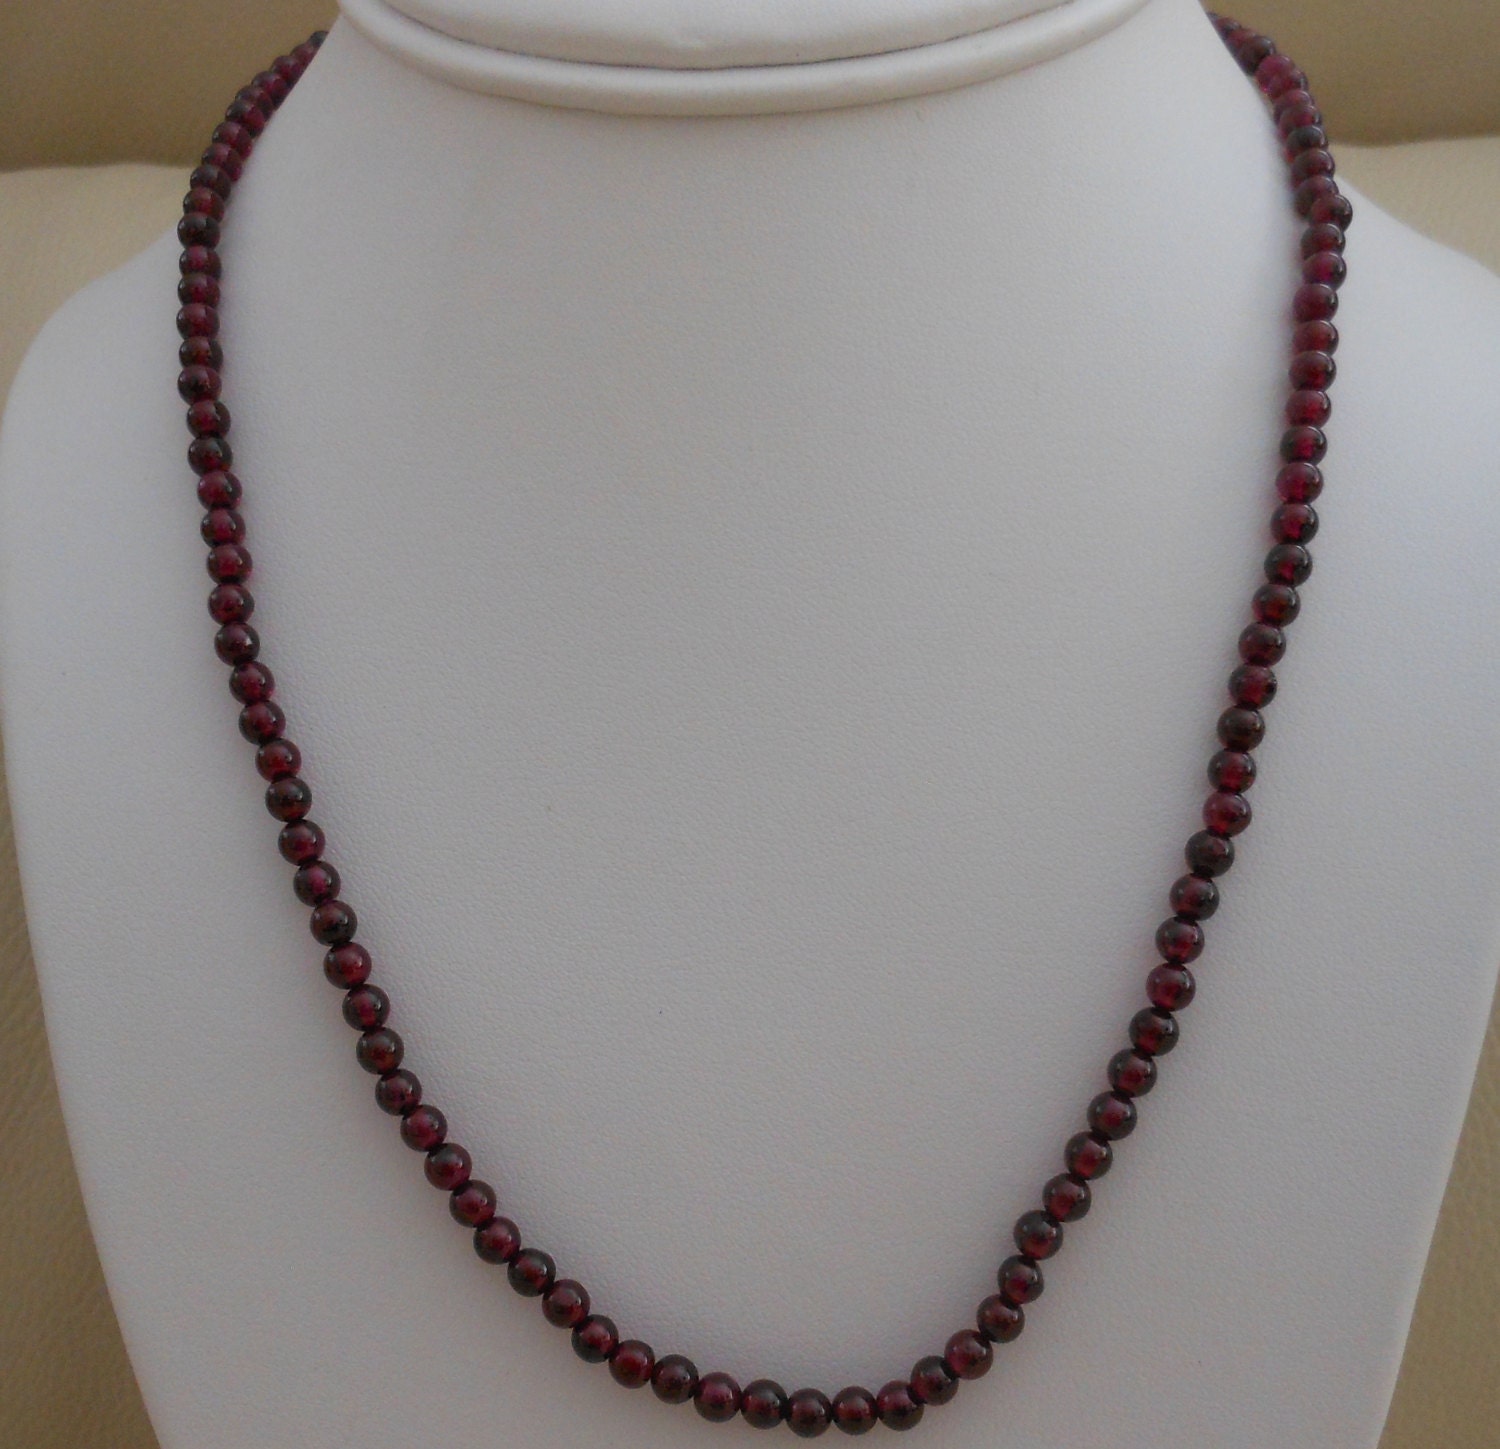 4mm Garnet Round Bead Necklace by VeeAarCreations on Etsy